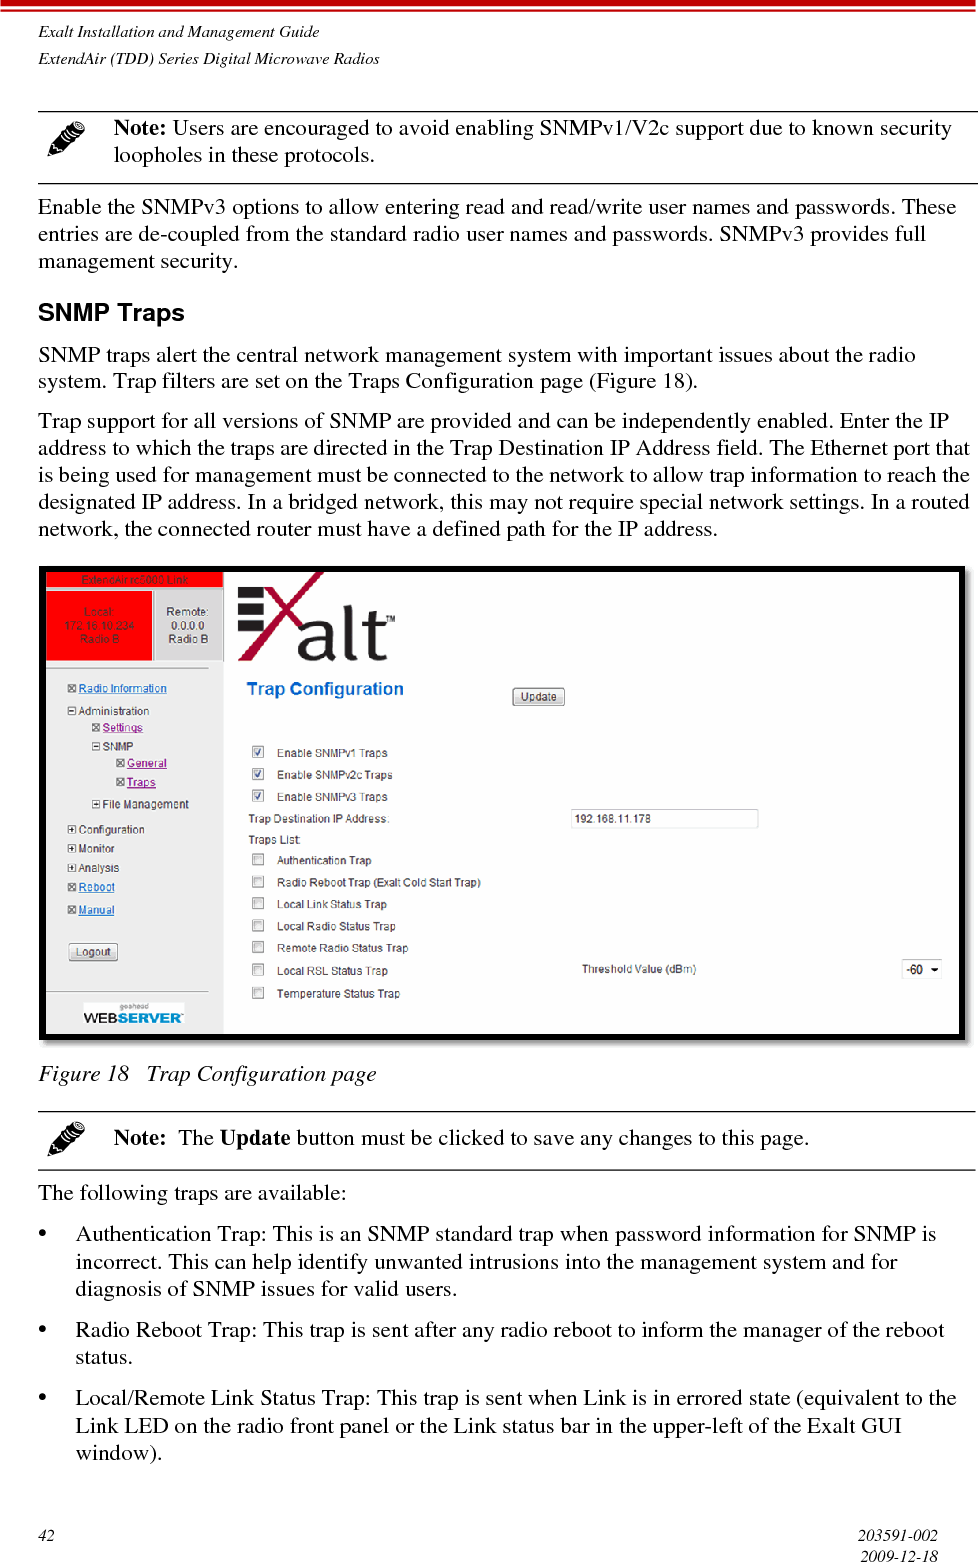 Exalt Installation and Management GuideExtendAir (TDD) Series Digital Microwave Radios42 203591-0022009-12-18Enable the SNMPv3 options to allow entering read and read/write user names and passwords. These entries are de-coupled from the standard radio user names and passwords. SNMPv3 provides full management security.SNMP TrapsSNMP traps alert the central network management system with important issues about the radio system. Trap filters are set on the Traps Configuration page (Figure 18). Trap support for all versions of SNMP are provided and can be independently enabled. Enter the IP address to which the traps are directed in the Trap Destination IP Address field. The Ethernet port that is being used for management must be connected to the network to allow trap information to reach the designated IP address. In a bridged network, this may not require special network settings. In a routed network, the connected router must have a defined path for the IP address.Figure 18   Trap Configuration pageThe following traps are available:•Authentication Trap: This is an SNMP standard trap when password information for SNMP is incorrect. This can help identify unwanted intrusions into the management system and for diagnosis of SNMP issues for valid users.•Radio Reboot Trap: This trap is sent after any radio reboot to inform the manager of the reboot status.•Local/Remote Link Status Trap: This trap is sent when Link is in errored state (equivalent to the Link LED on the radio front panel or the Link status bar in the upper-left of the Exalt GUI window).Note: Users are encouraged to avoid enabling SNMPv1/V2c support due to known security loopholes in these protocols.Note:  The Update button must be clicked to save any changes to this page.